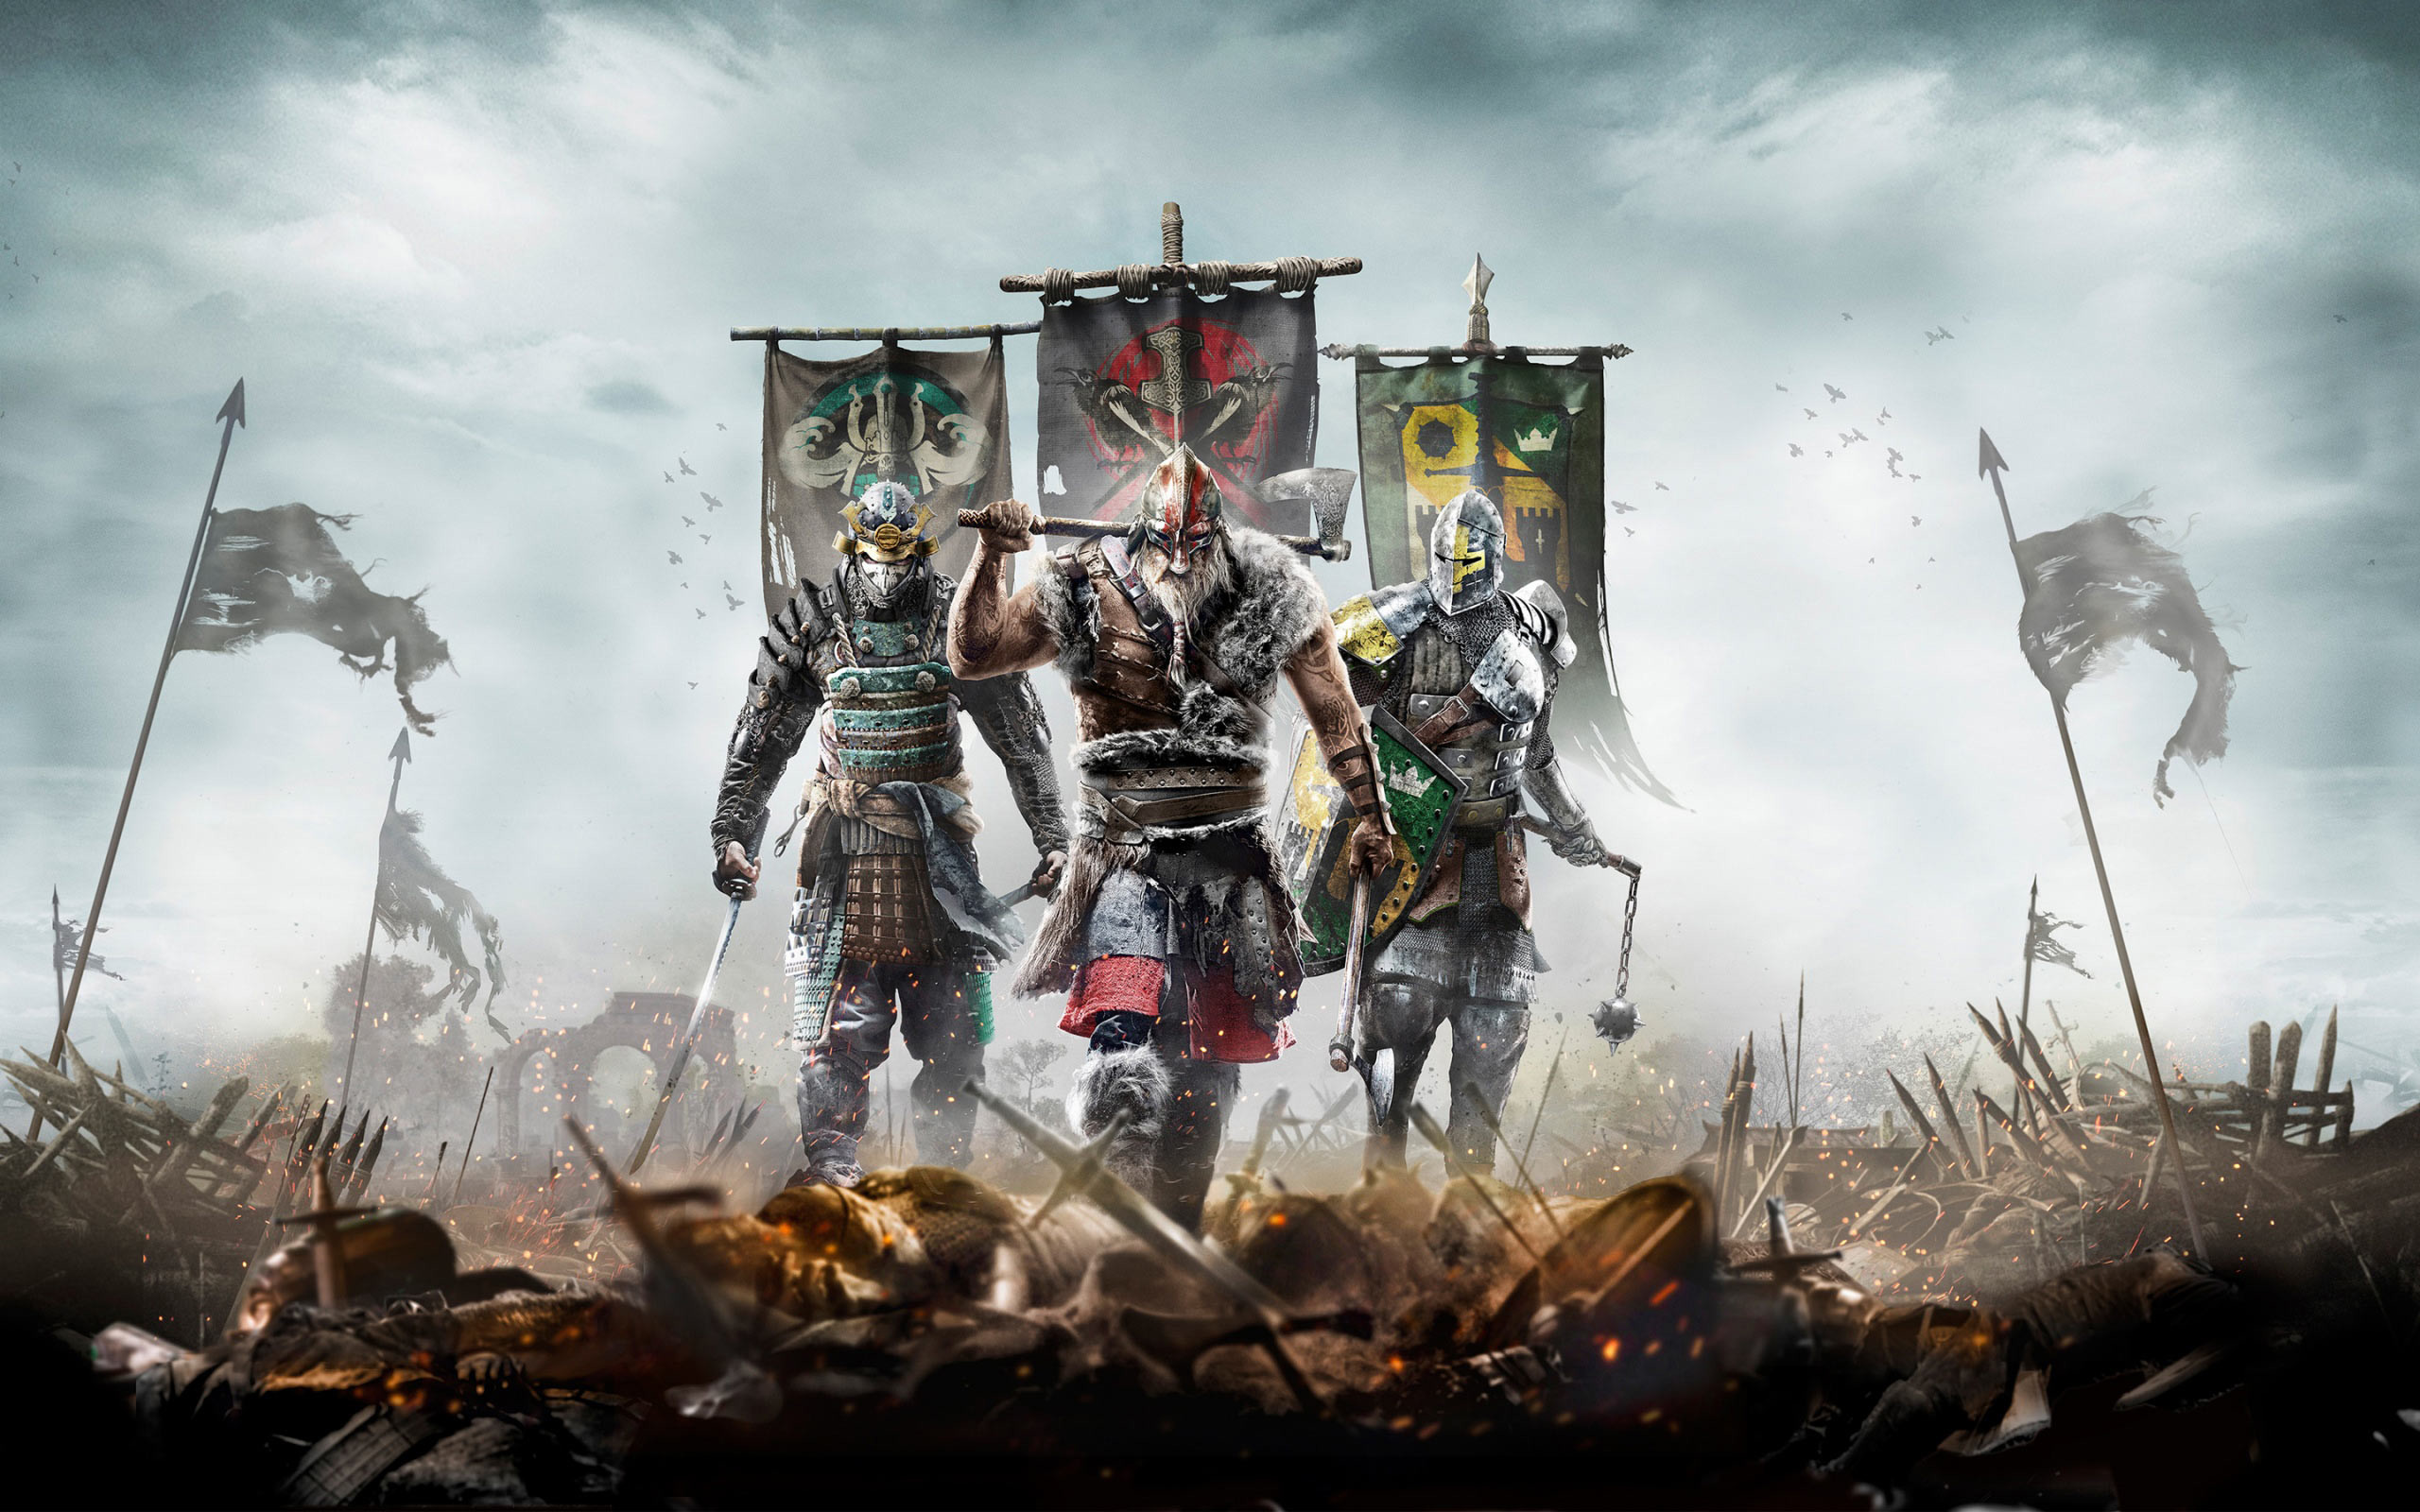 2560x1600 Wallpaper HD For Honor #ForHonor #Ubisoft #PC #PS4 #XboxOne #Vikings